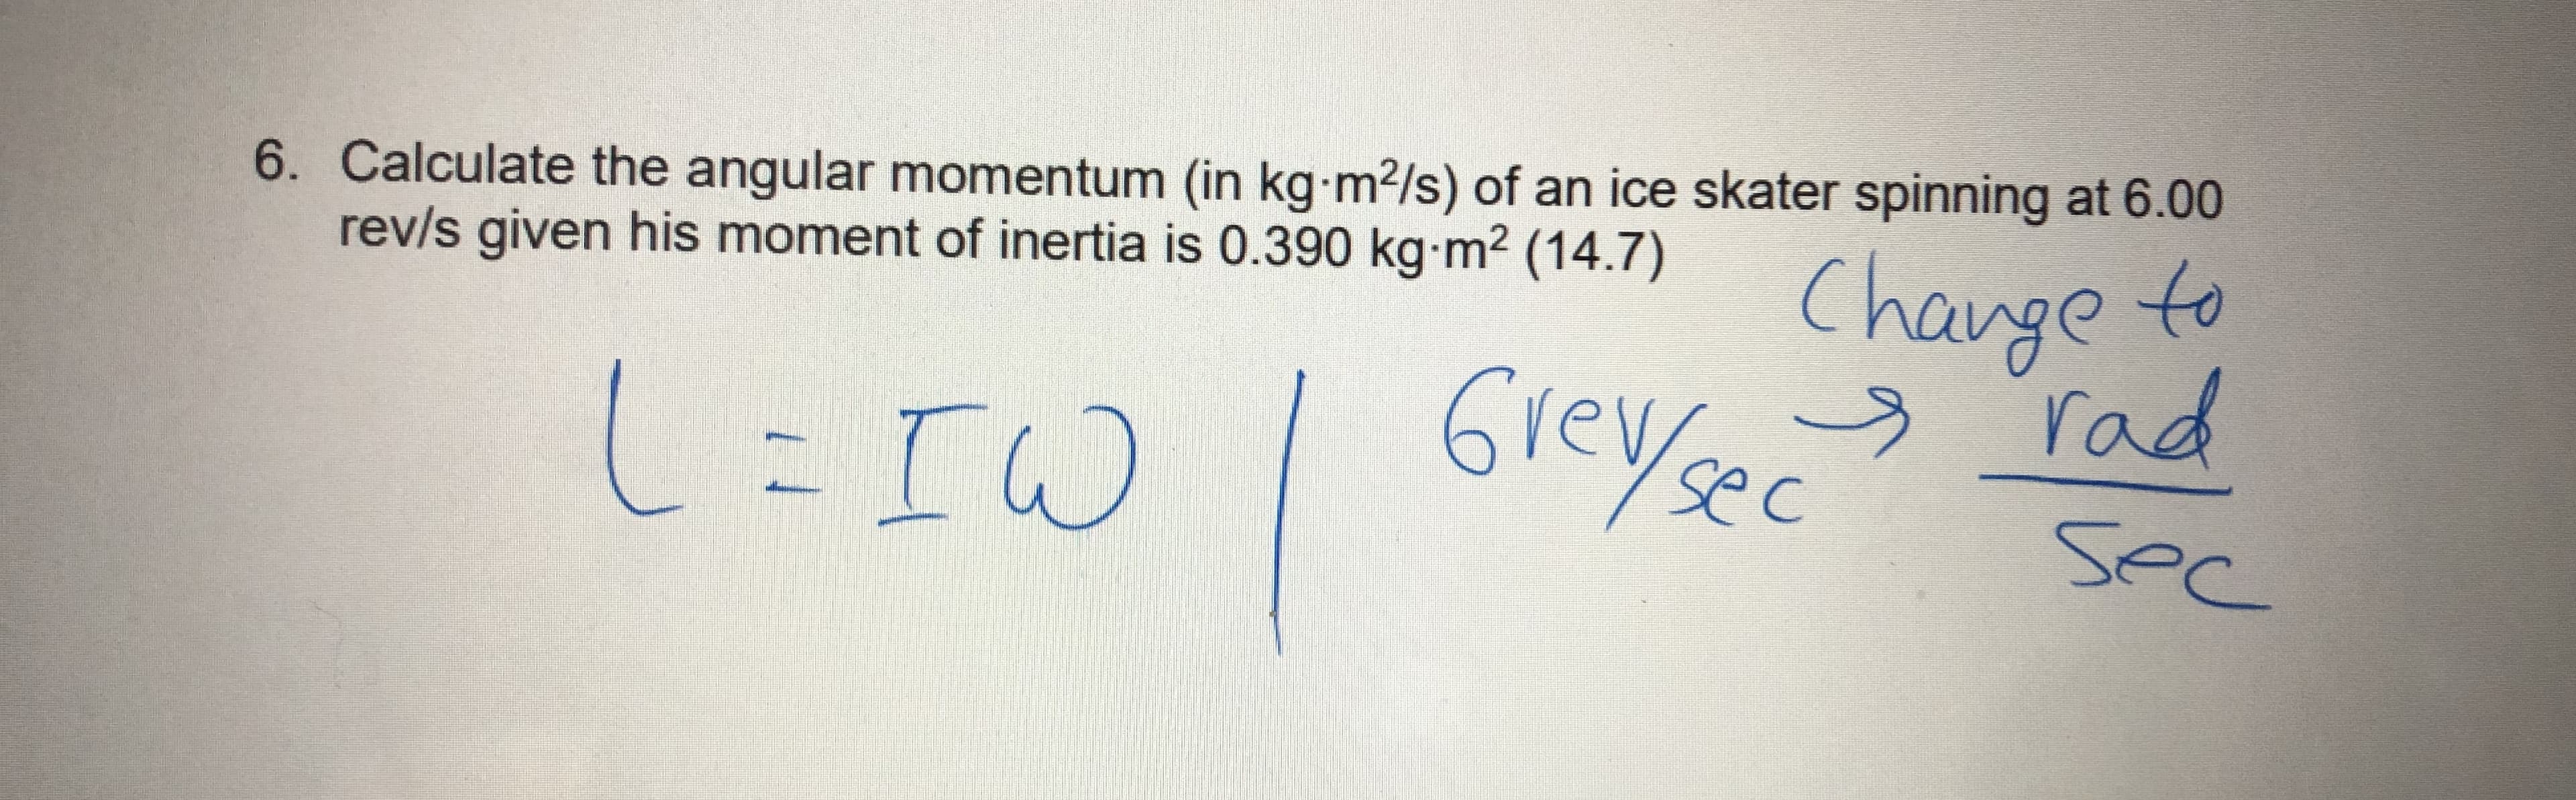 6. Calculate the angular momentum (in kg m²/s) of an ice skater spinning at 6.00
rev/s given his moment of inertia is 0.390 kg m2 (14.7)
Change to
L=IW
Grey sec
y rad
sec
